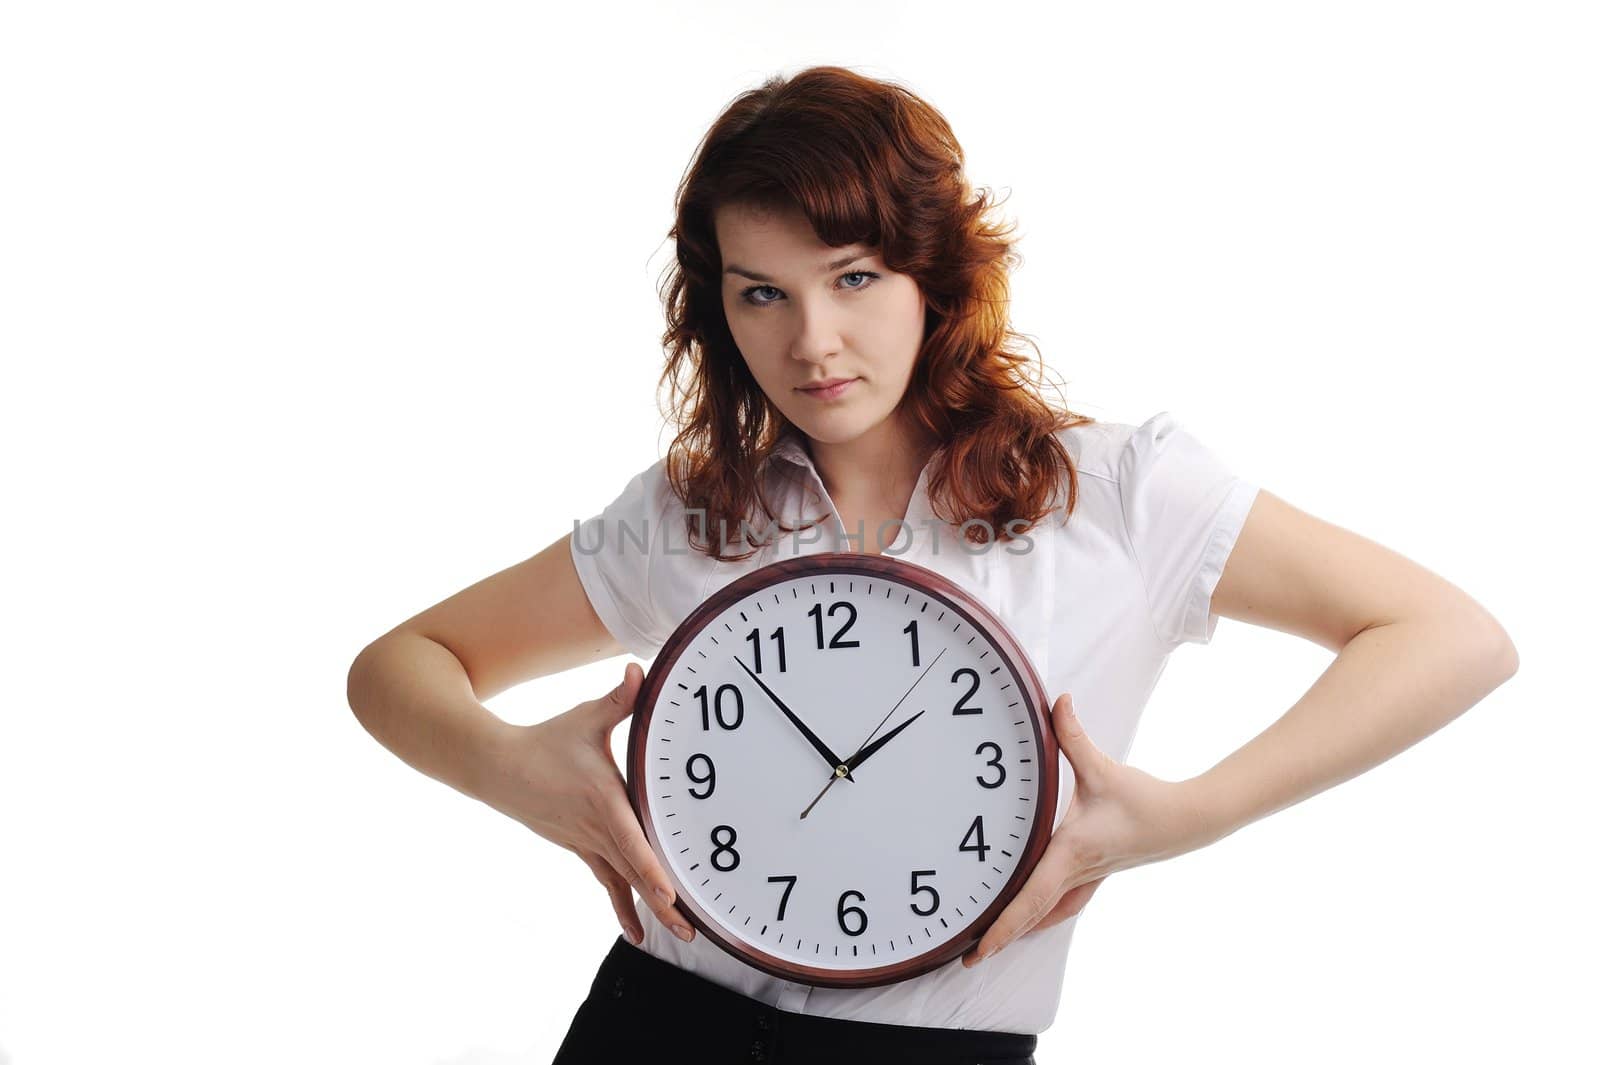 An image of a young woman with a clock